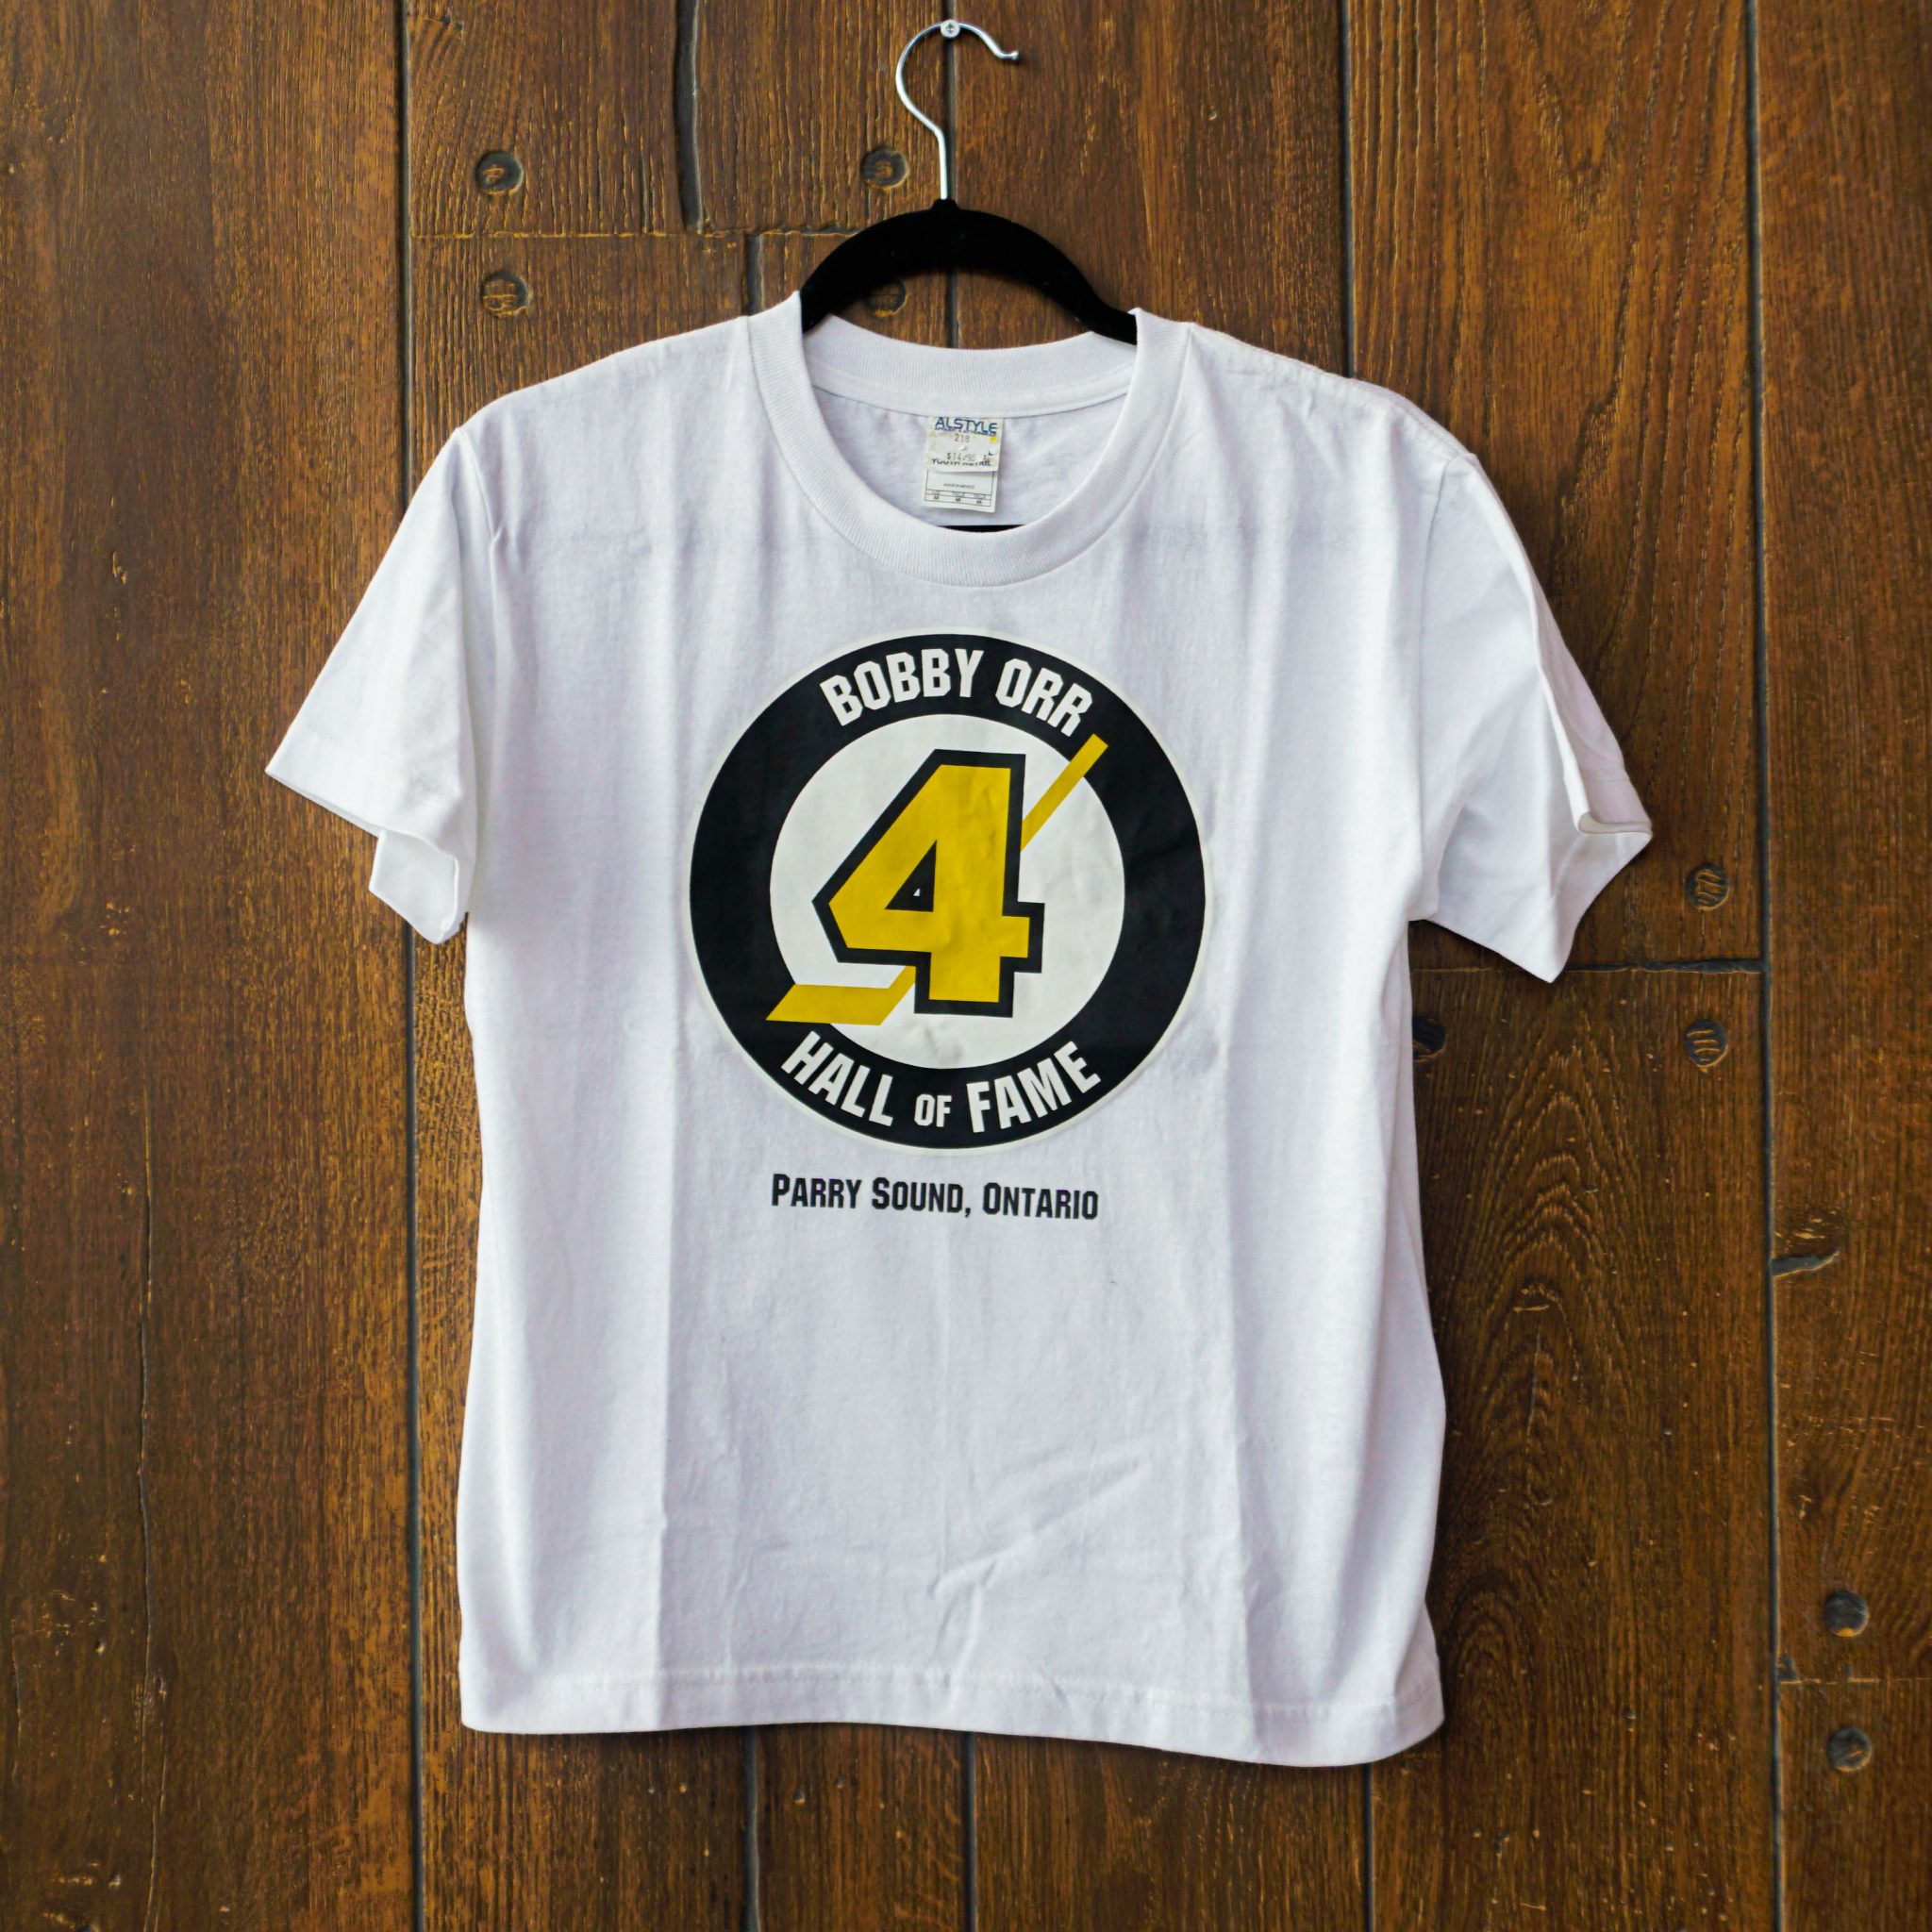 Bobby Orr Number 4 - The Yellow Stencil Kids T-Shirt